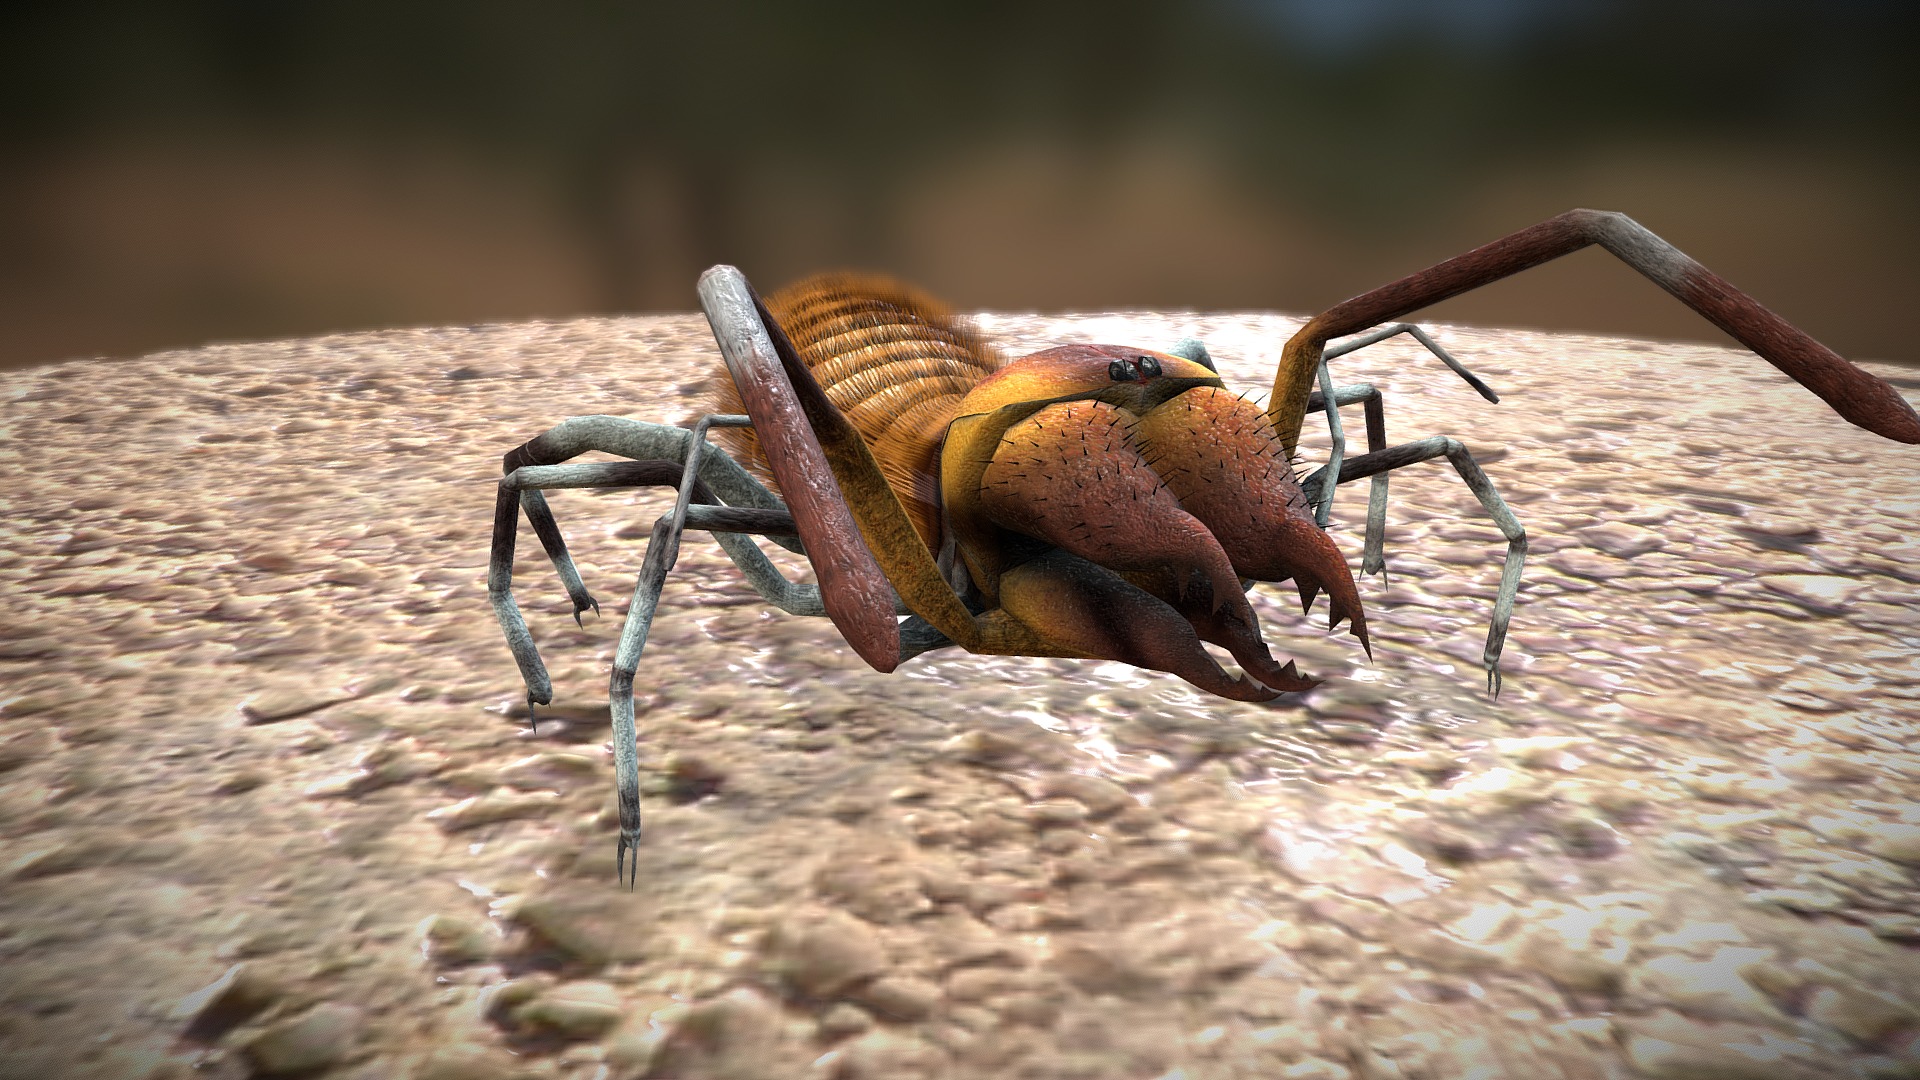 3D model Sun Spider - This is a 3D model of the Sun Spider. The 3D model is about a bug on a rock.